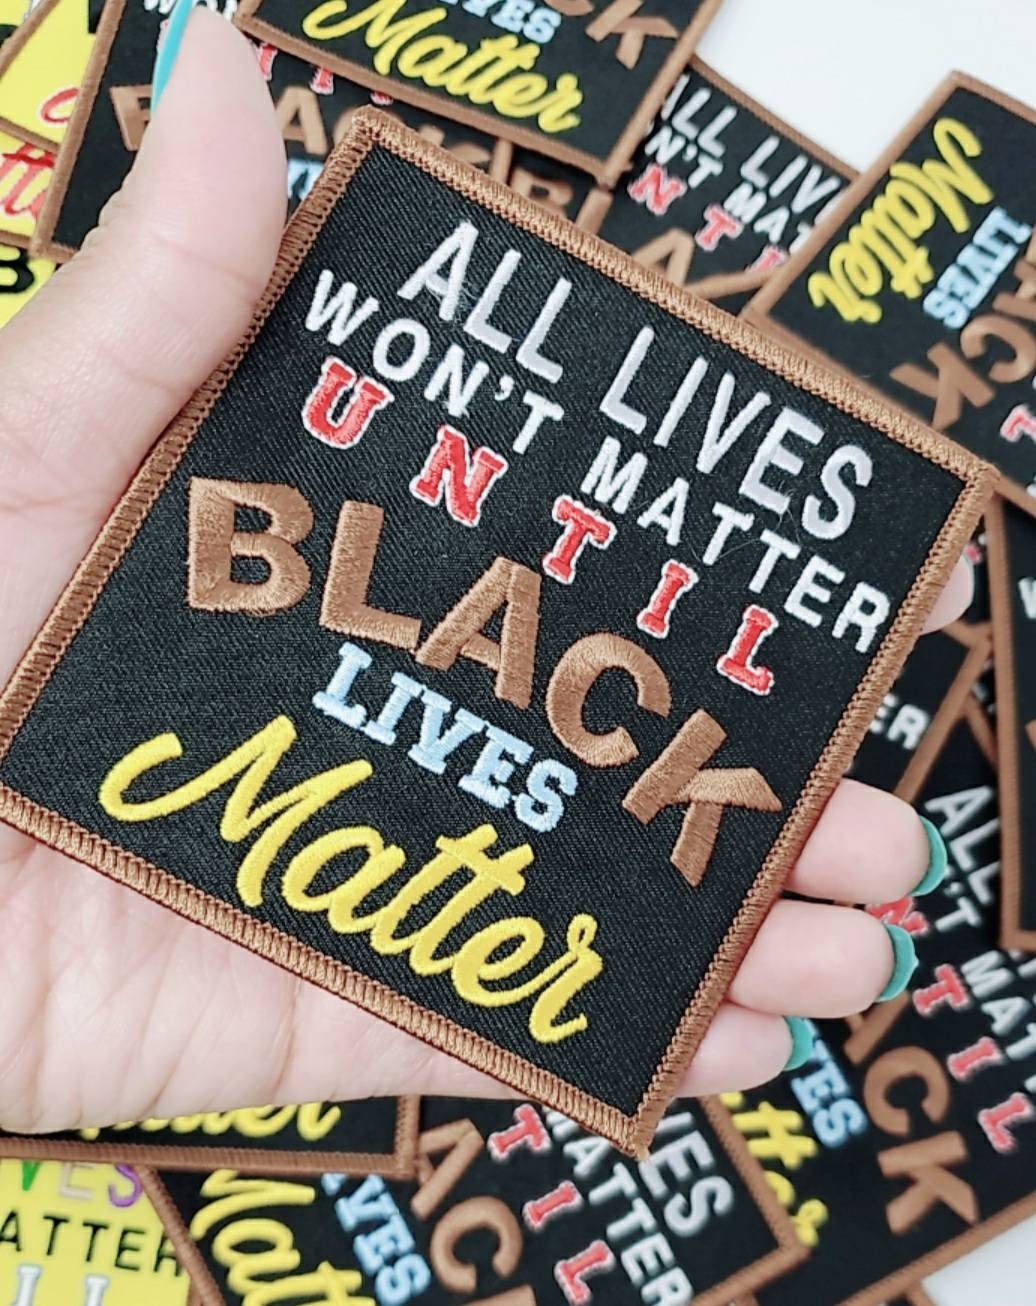 NEW, "All Lives Won't Matter" (Black)  Exclusive, African-American BLM, Size 4"x4", Iron-on Patch, Conscious Gifts, Black Lives Matter